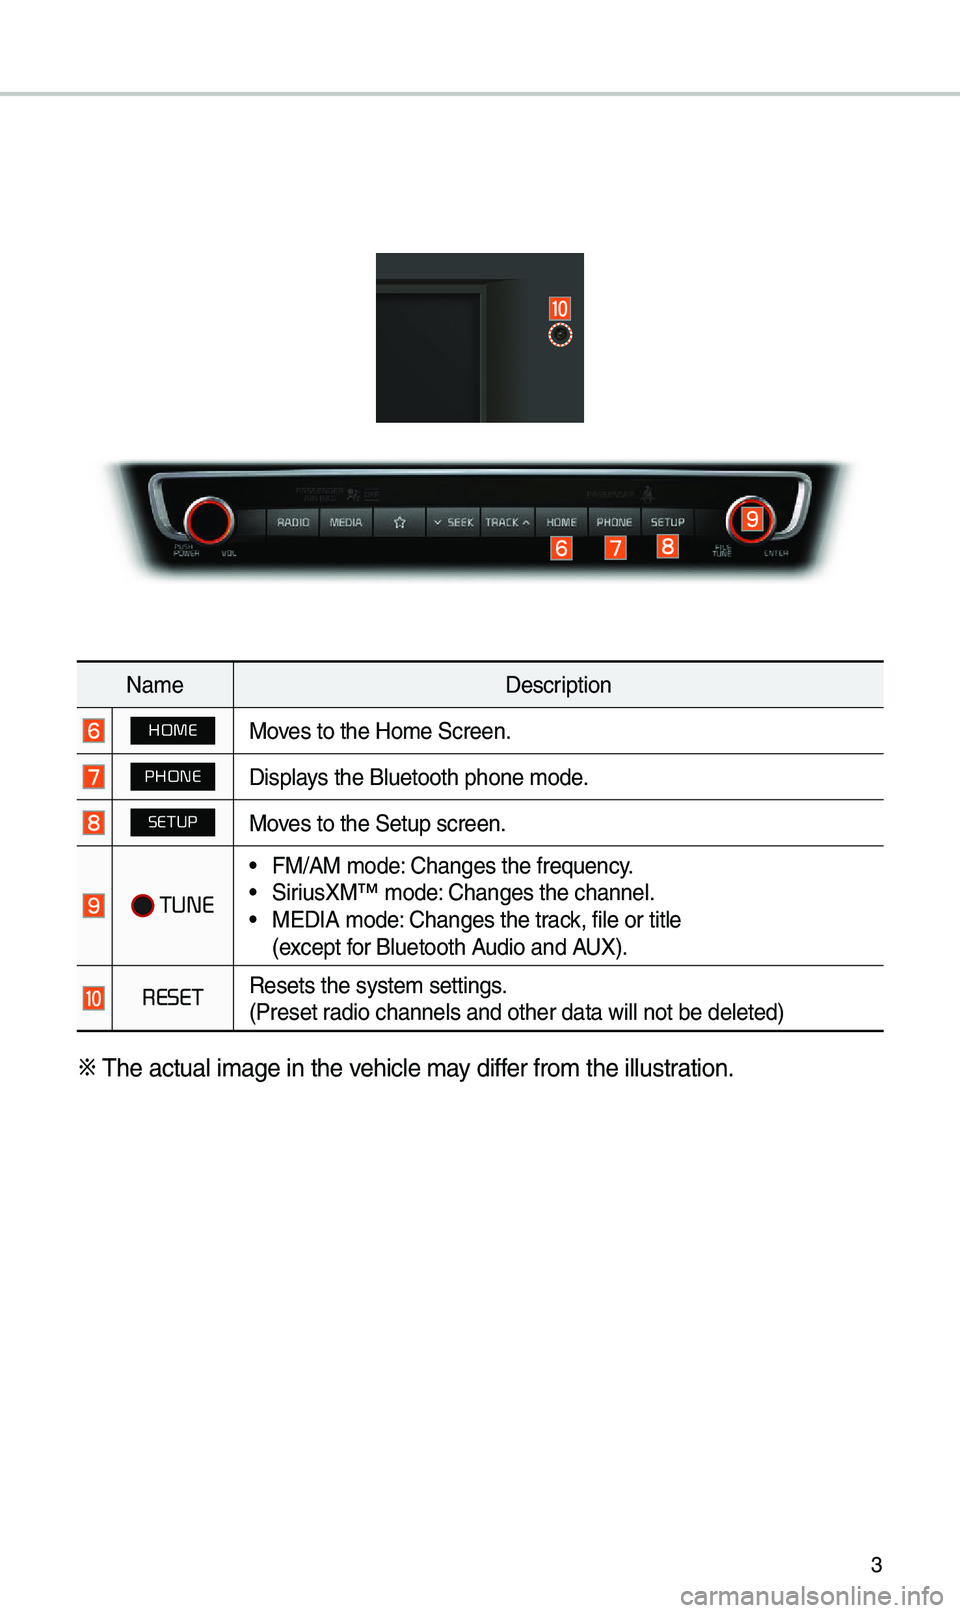 KIA OPTIMA 2020  Quick Reference Guide 3
Na\beDescription
HOMEMoves to the Ho\be Screen.\e
PHONEDisplays the Bluetooth ph\eone \bode.
SETUPMoves to the Setup scre\een.
 TUNE
 •FM/AM \bode: Changes the frequen\ecy. •SiriusXM™ \bode: C